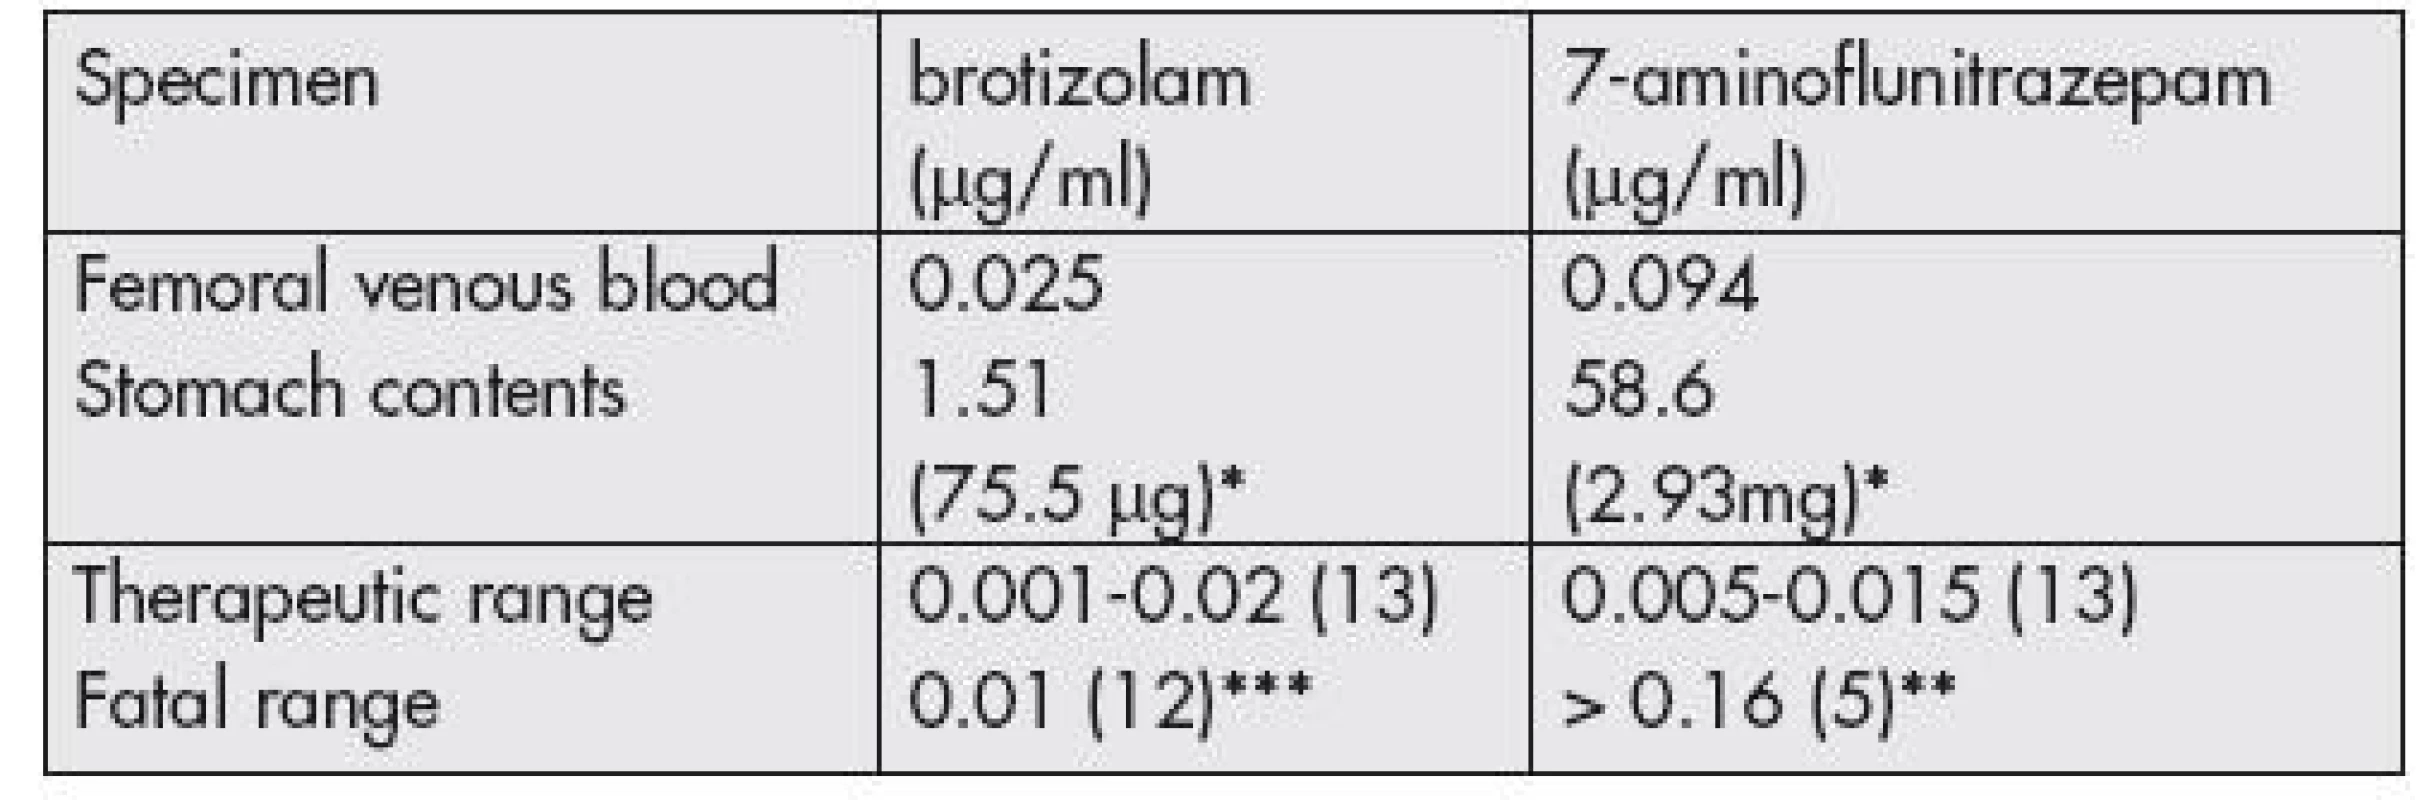 Brotizolam and 7-aminoflunitrazepam concentrations in the sample, and their therapeutic and fatal levels.